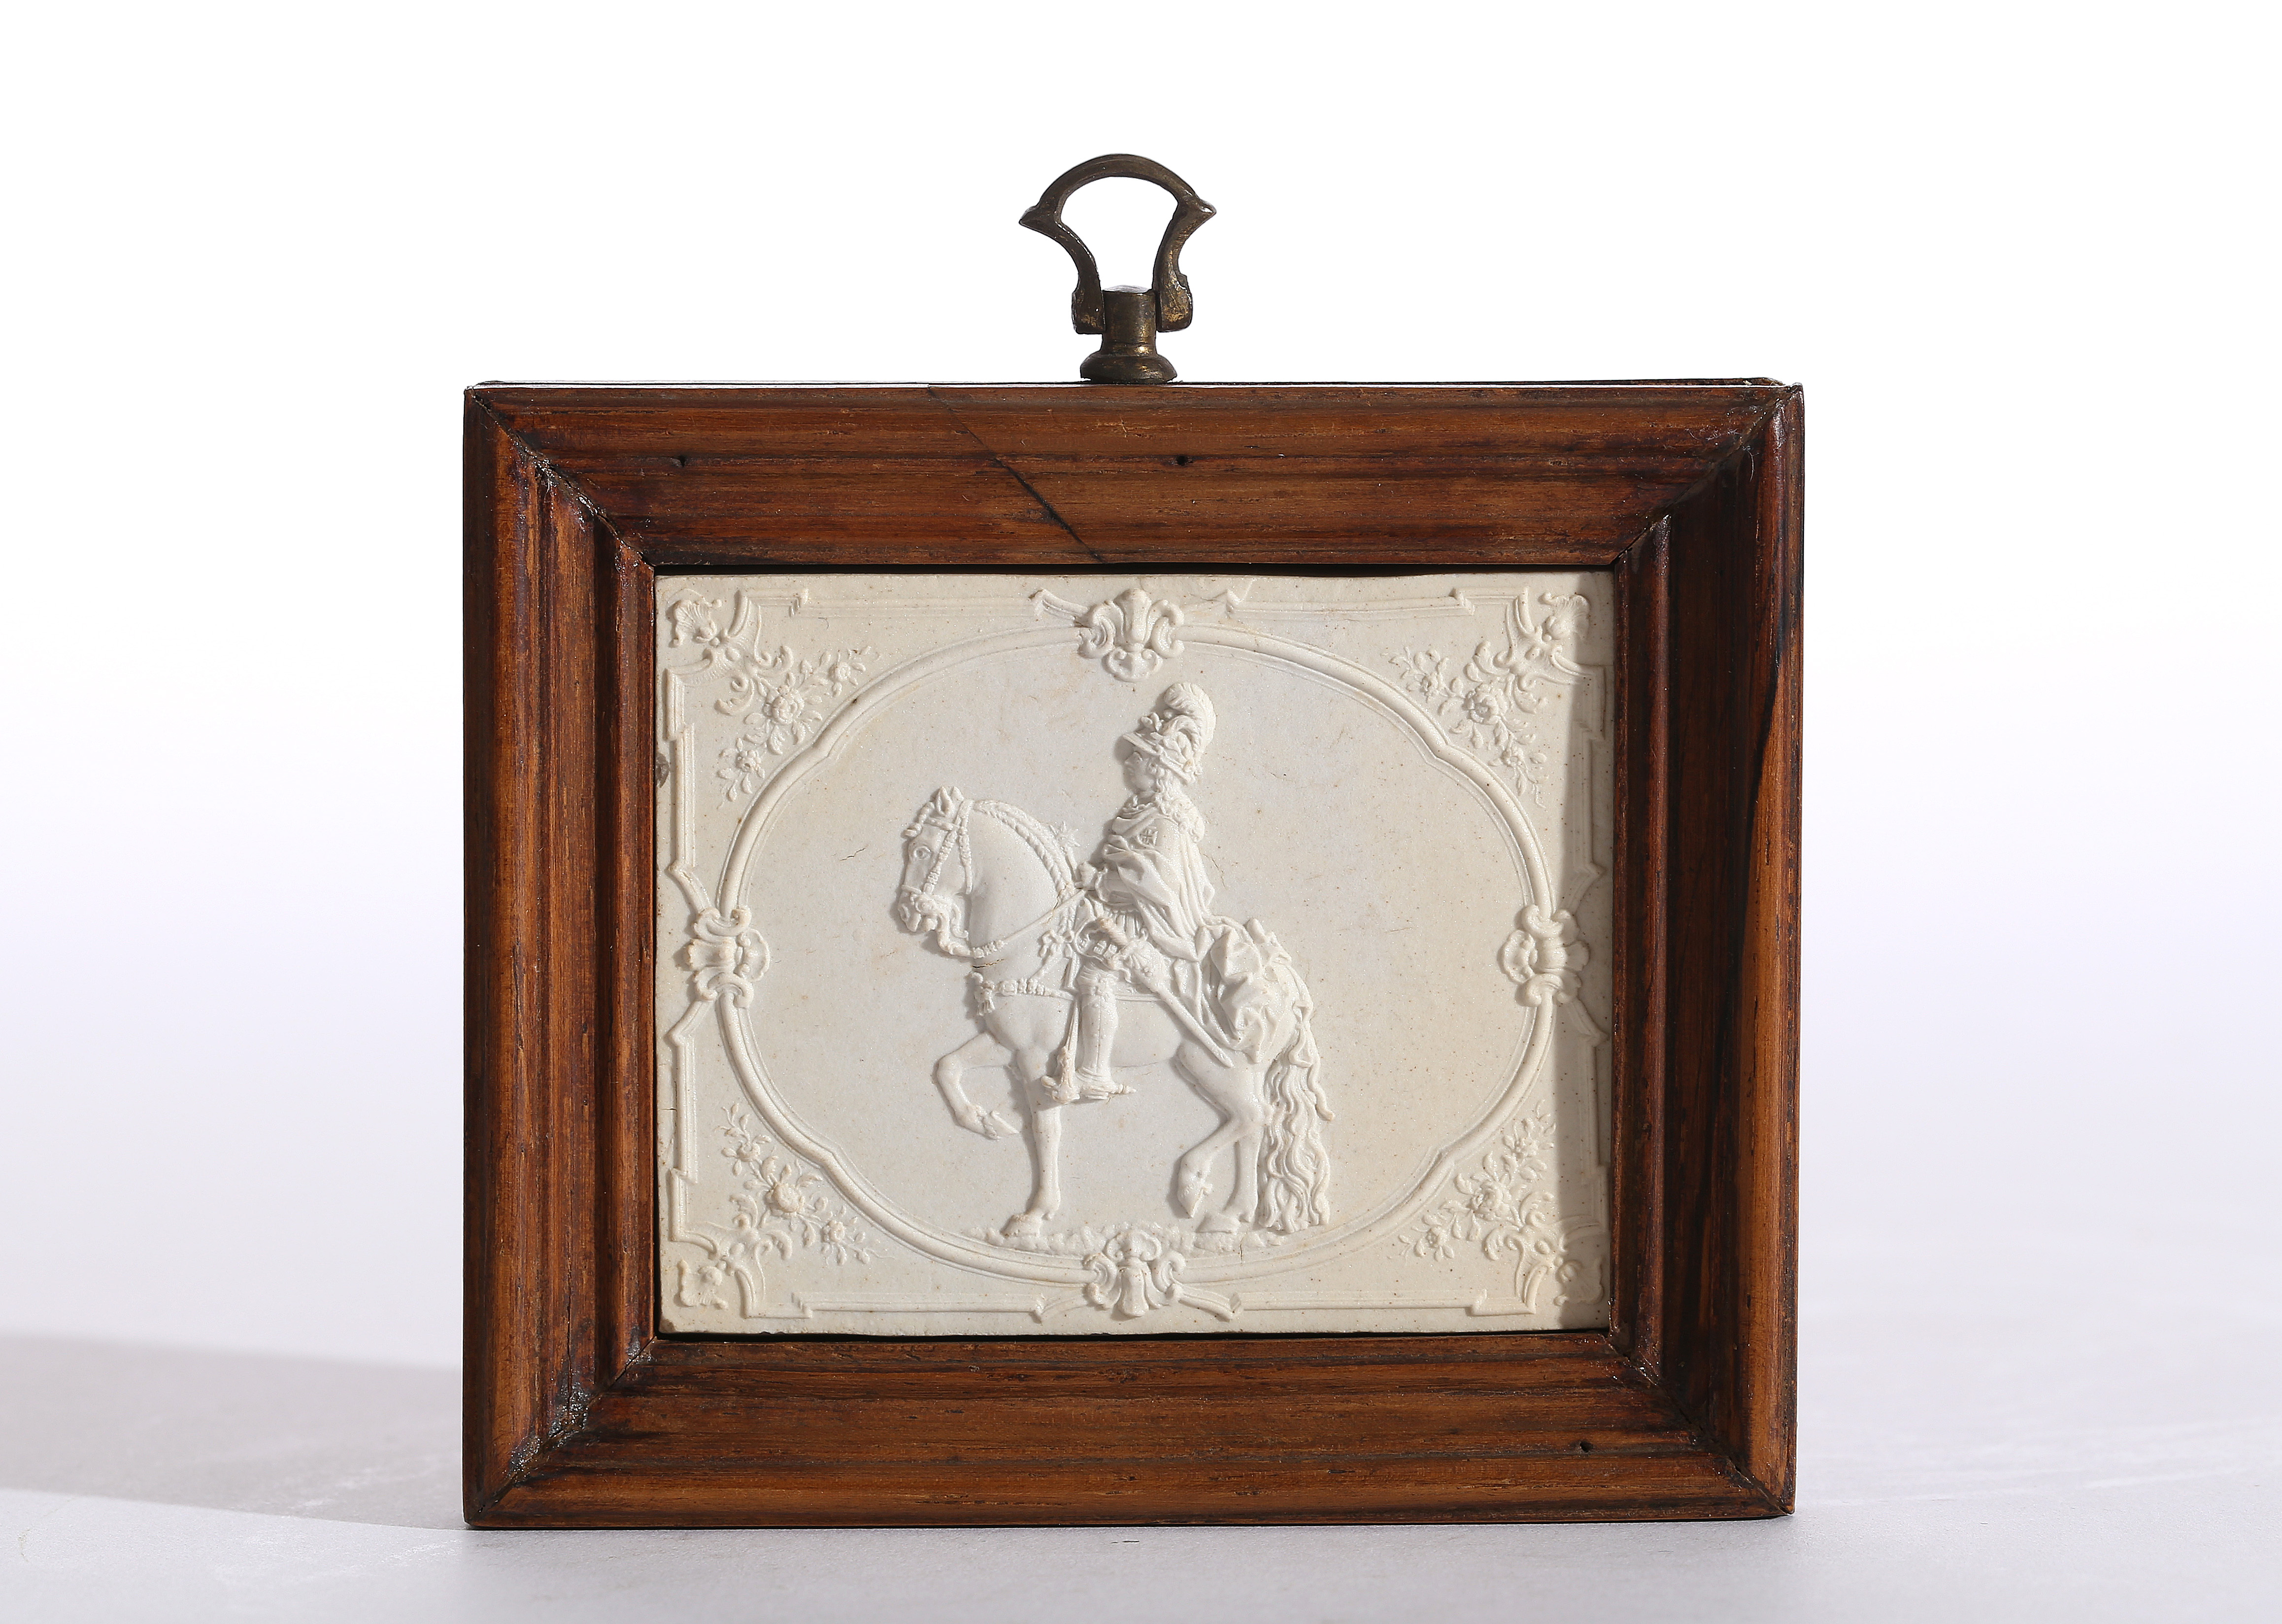 BISCUIT PORCELAIN PLAQUE OF THE EQUESTRIAN STATUE OF KING JOSÉ I OF PORTUGAL